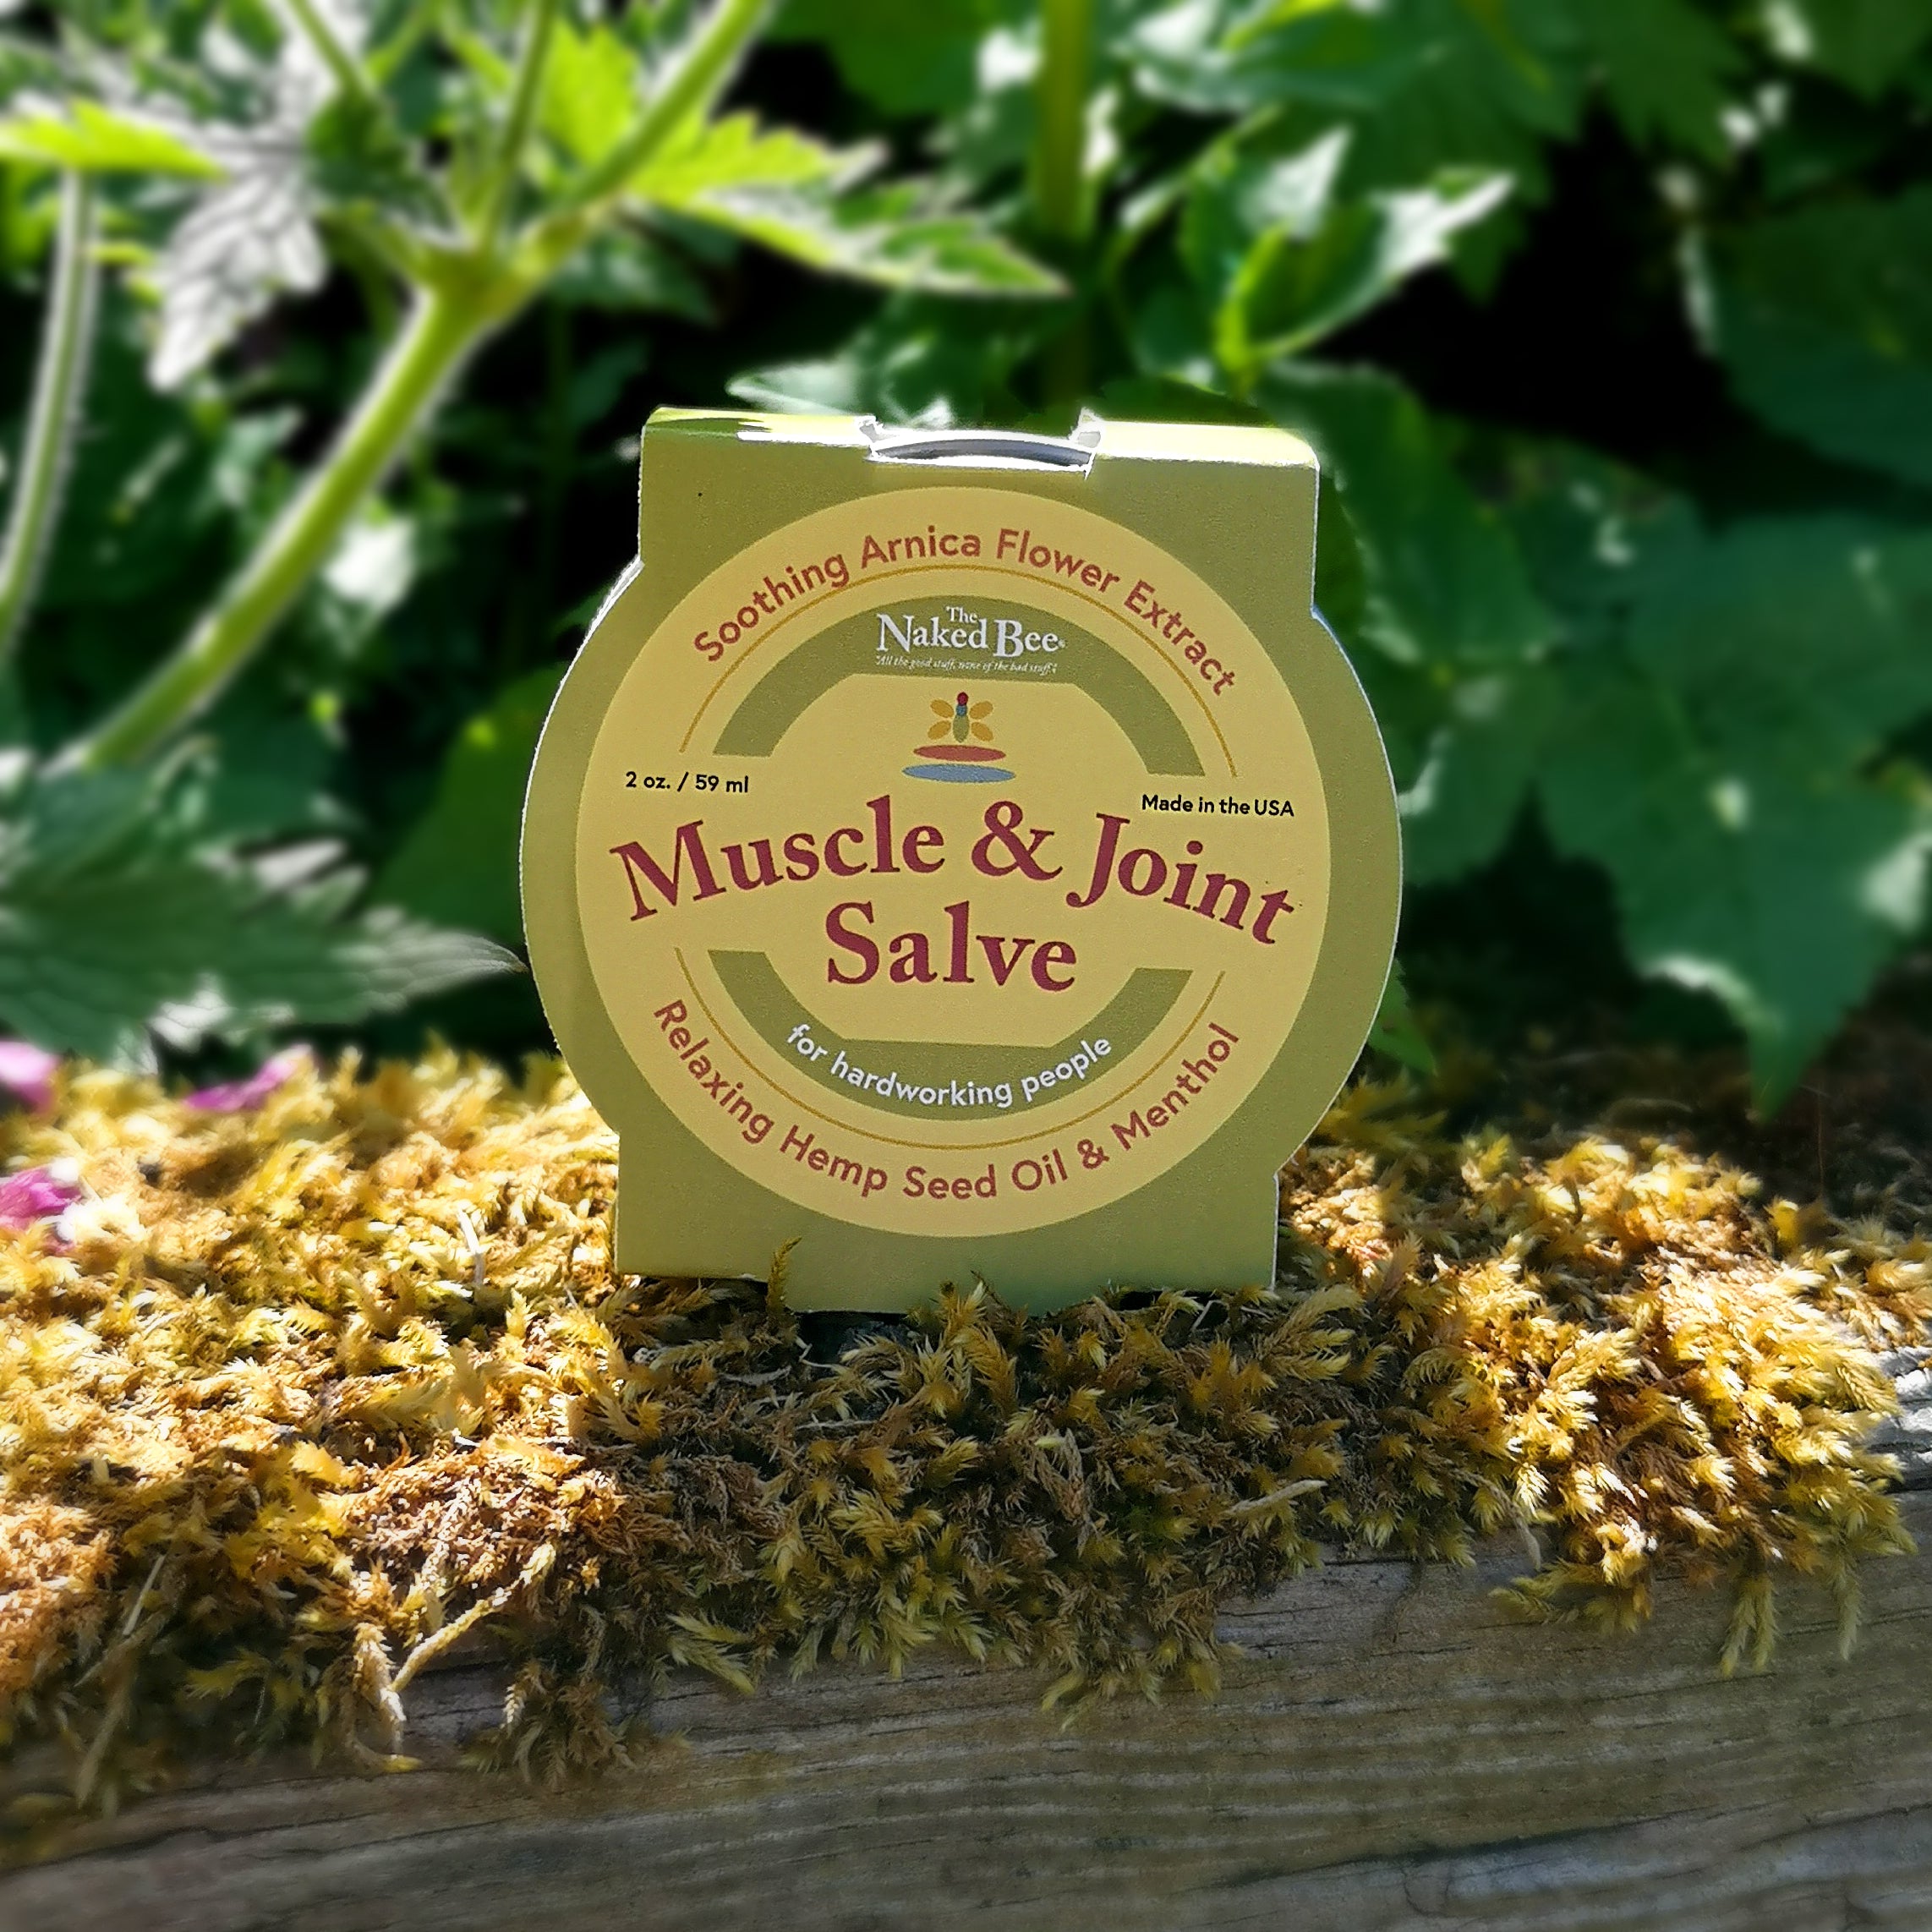 The Naked Bee - Muscle & Joint Salve